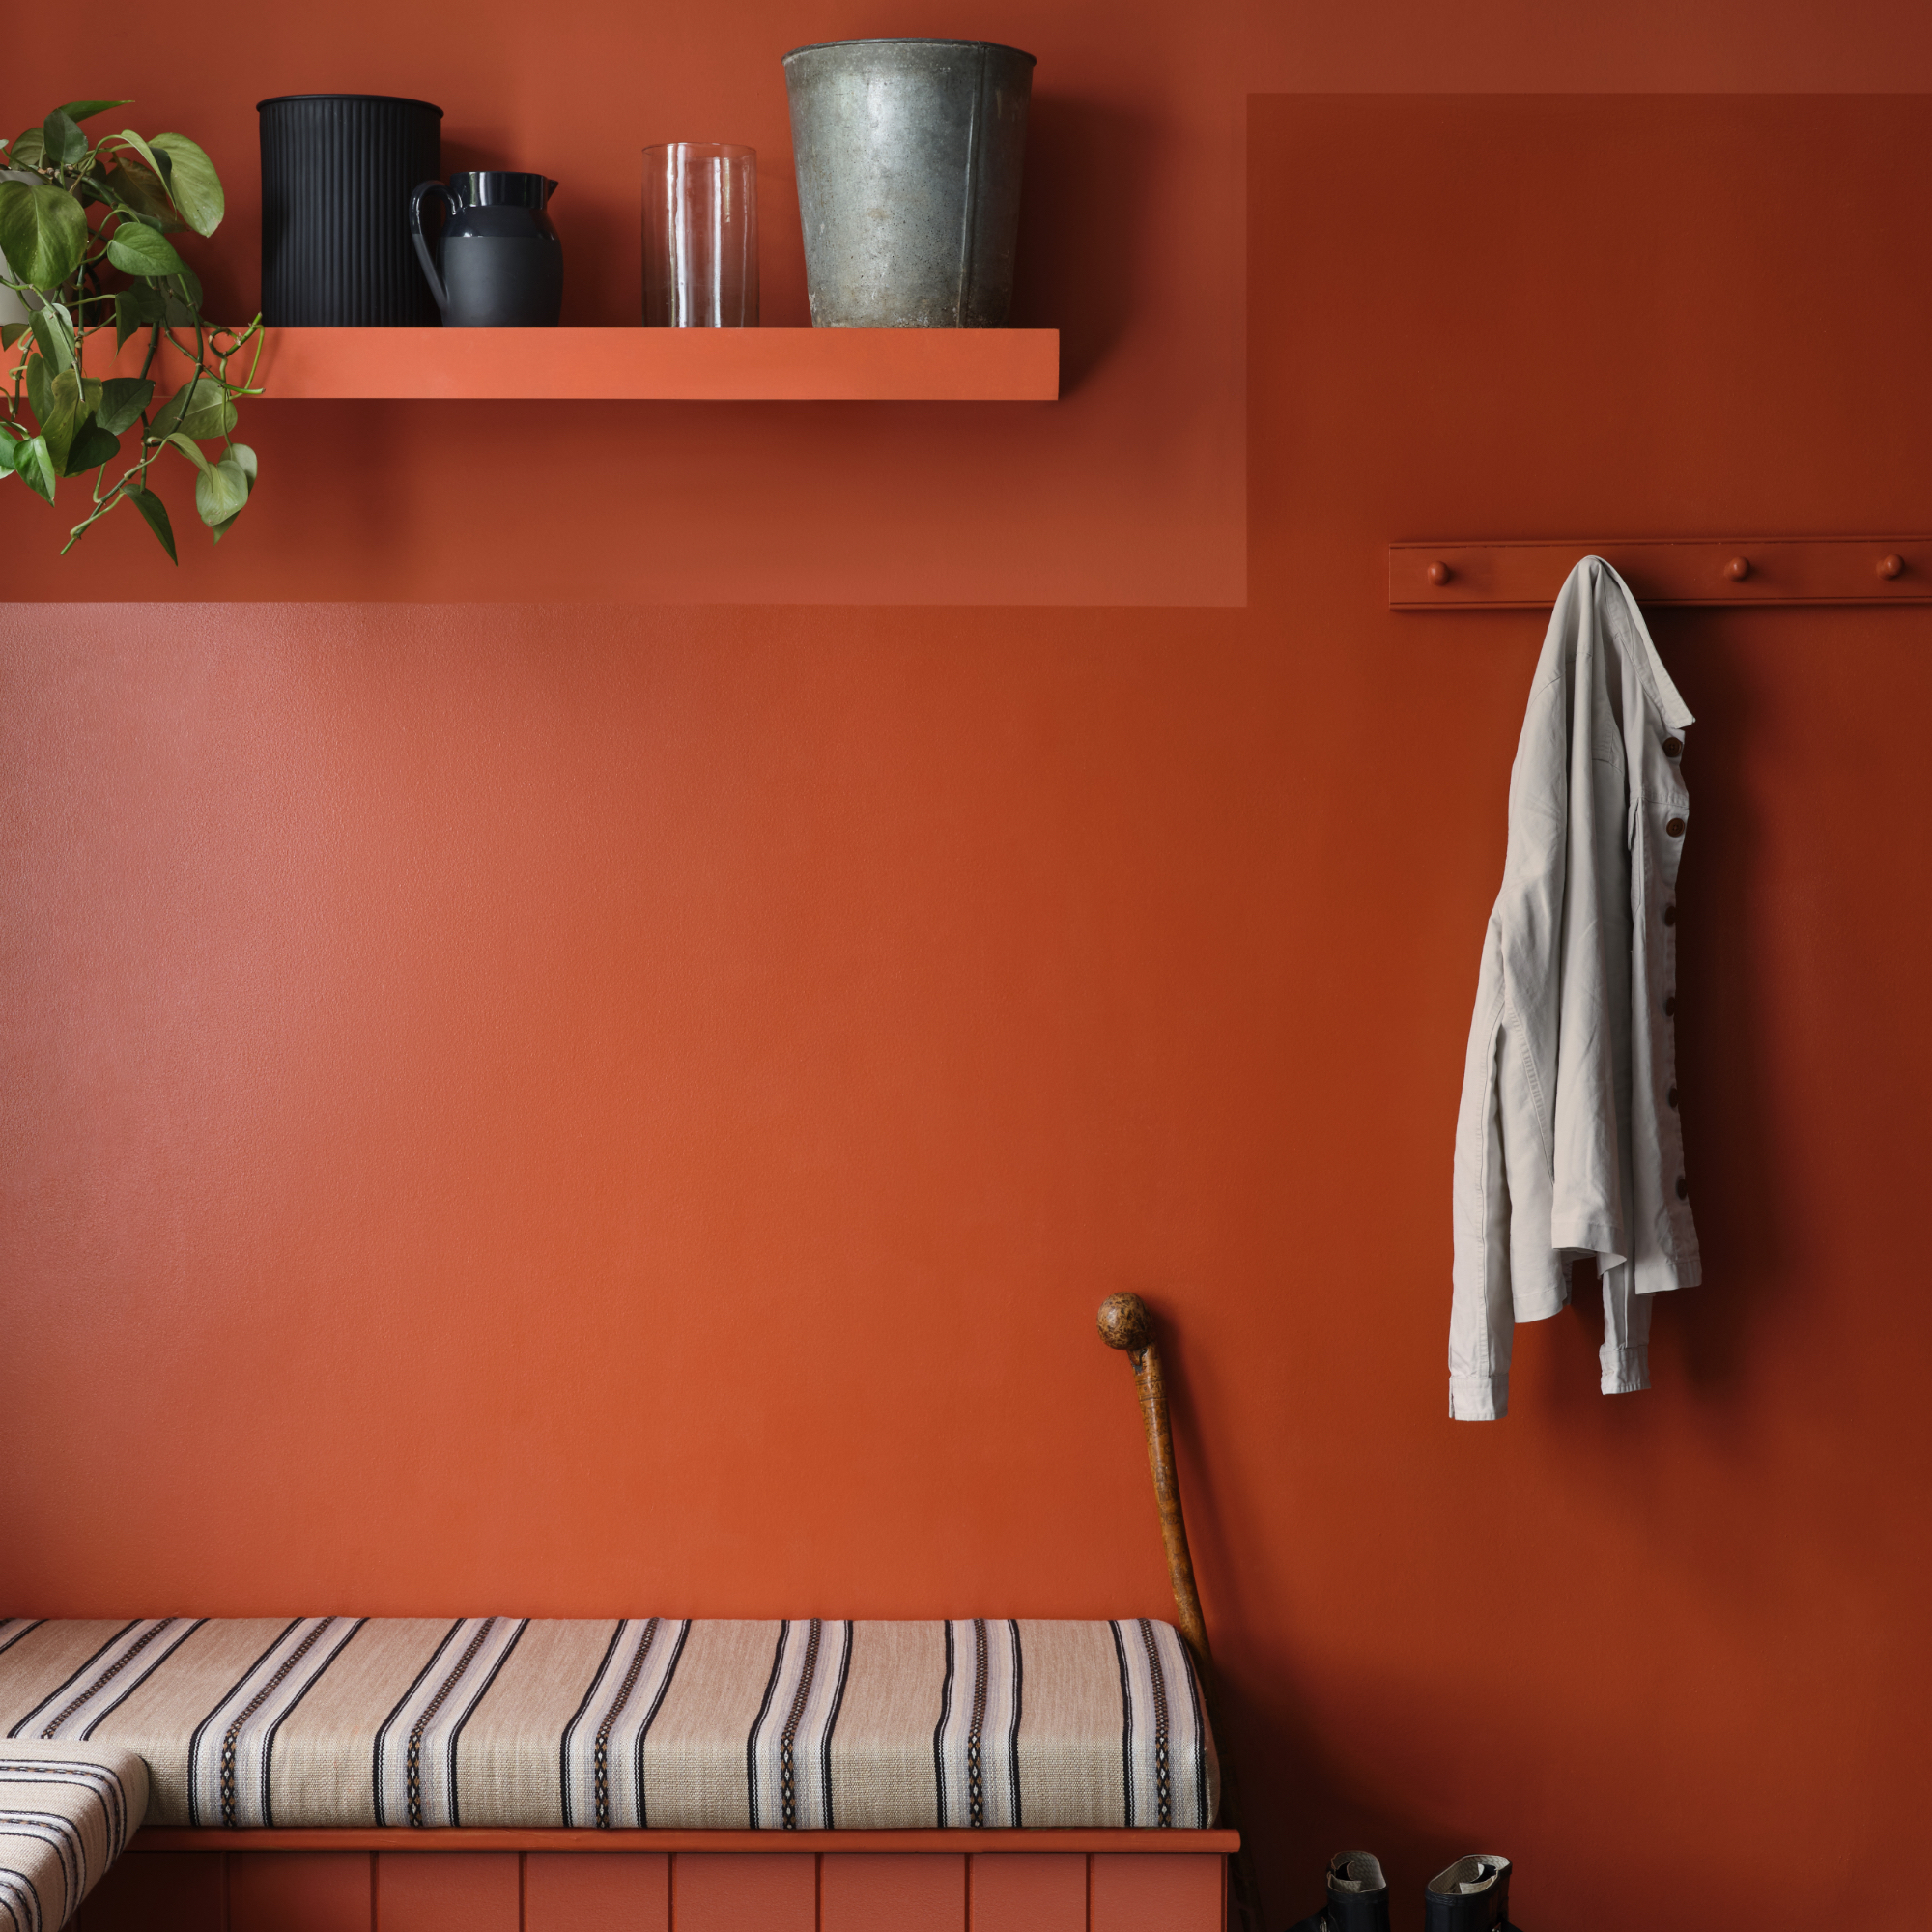 utility room colour ideas, orange utility room with matt and gloss paint finishes, bench seat, open shelving, peg rail